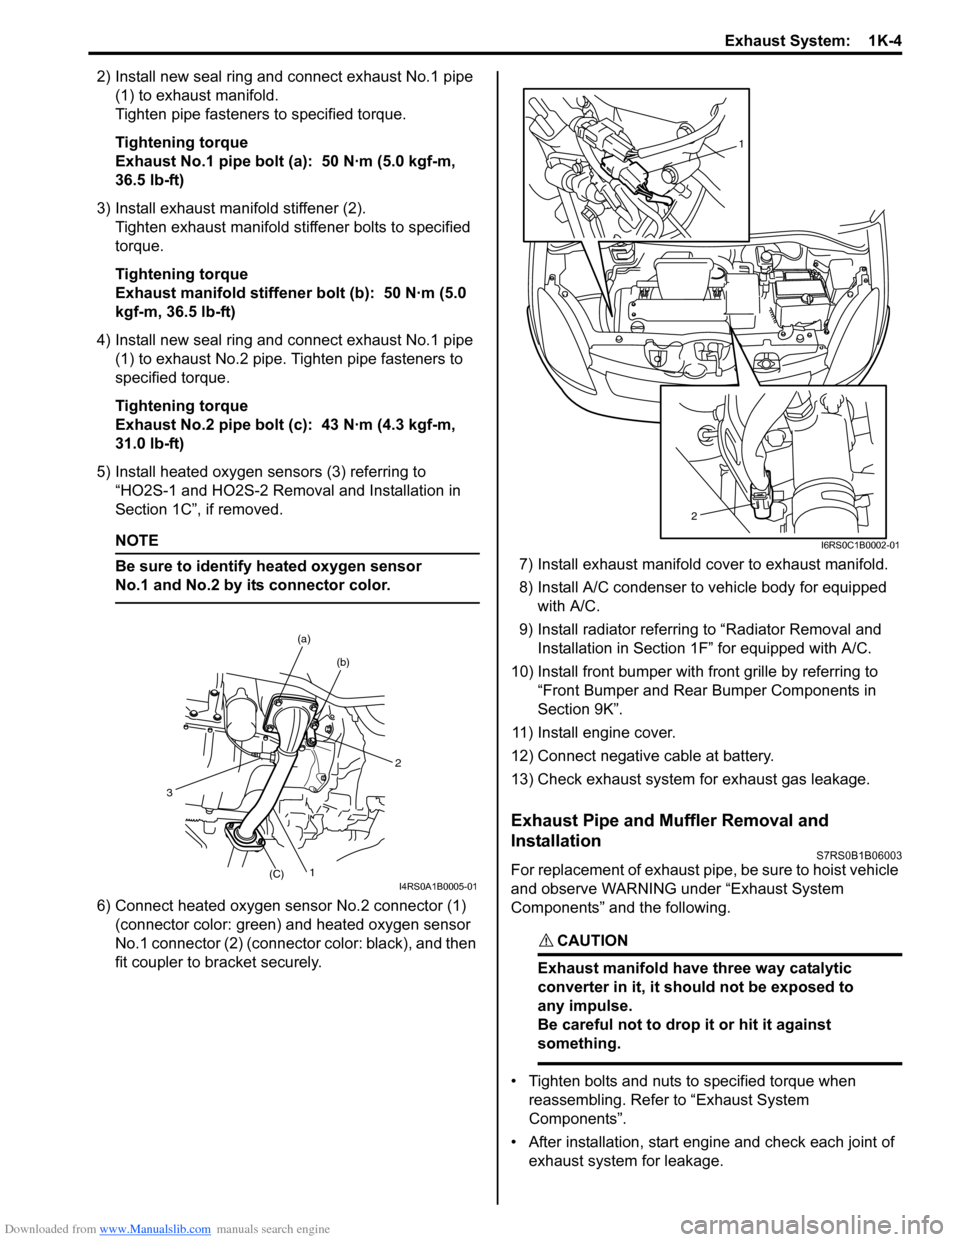 SUZUKI SWIFT 2007 2.G Service Workshop Manual Downloaded from www.Manualslib.com manuals search engine Exhaust System:  1K-4
2) Install new seal ring and connect exhaust No.1 pipe (1) to exhaust manifold.
Tighten pipe fasteners to specified torqu